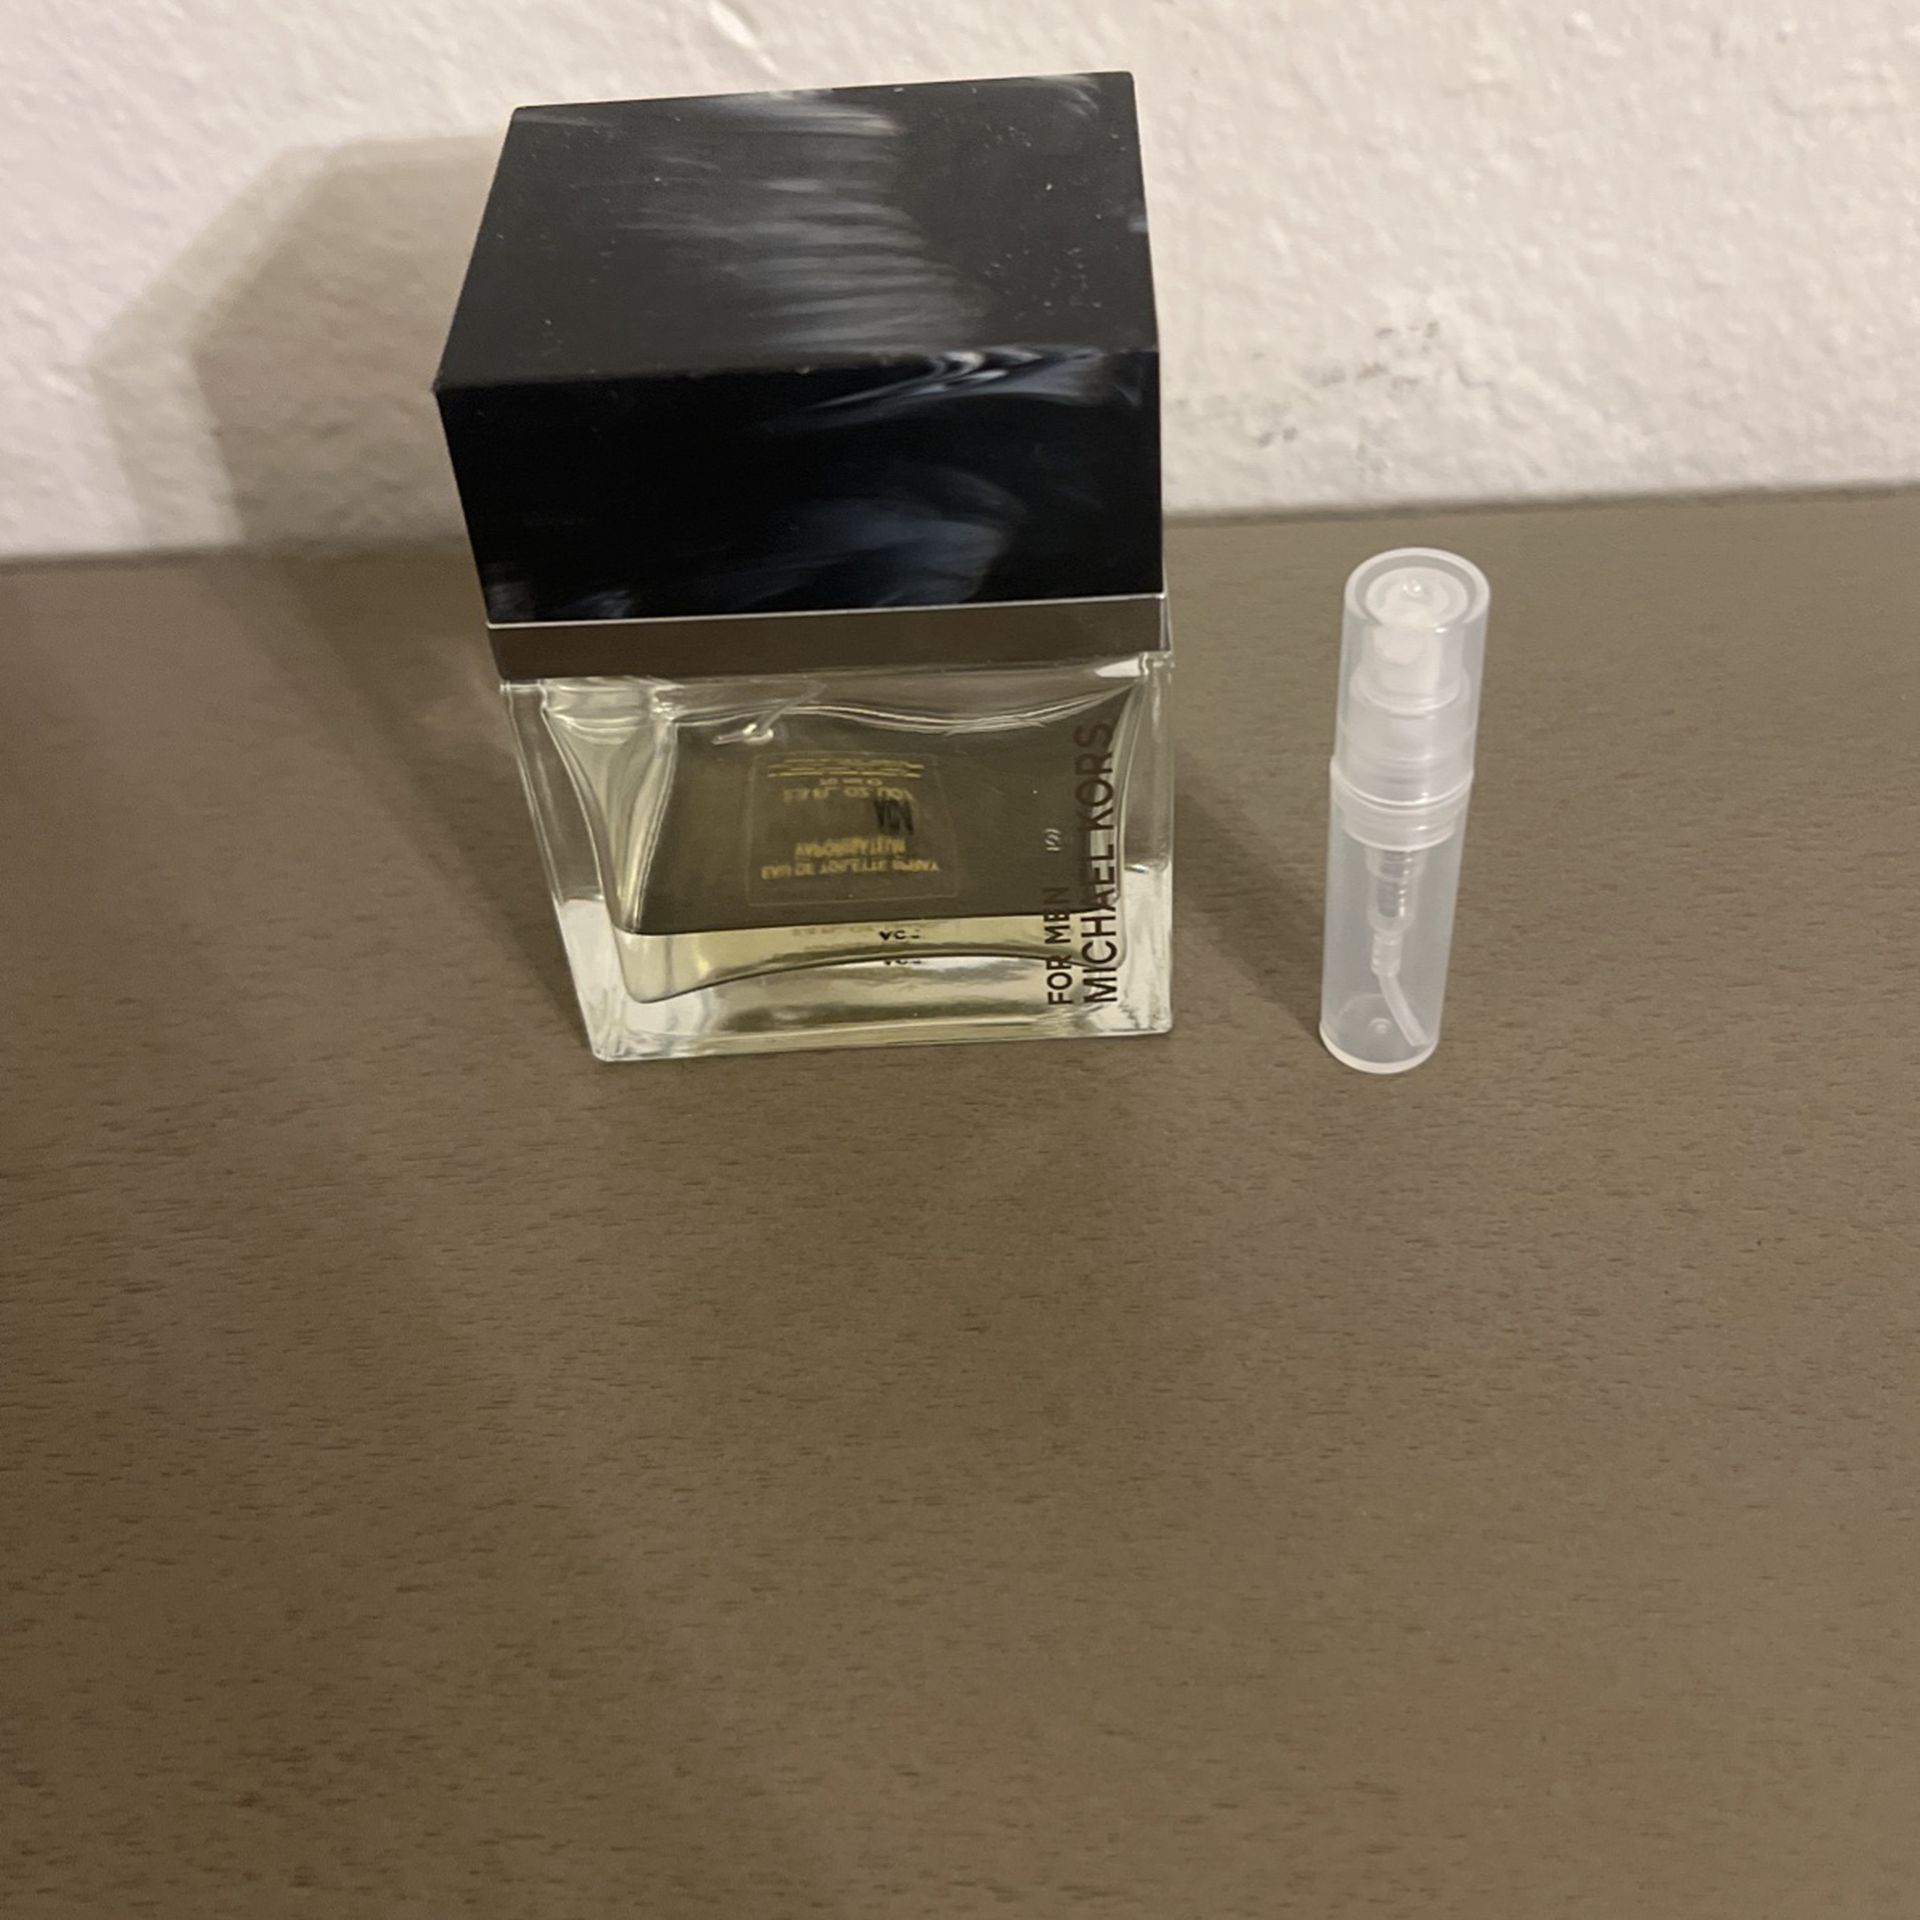 2ml Decant Of Micheal Kors For Men